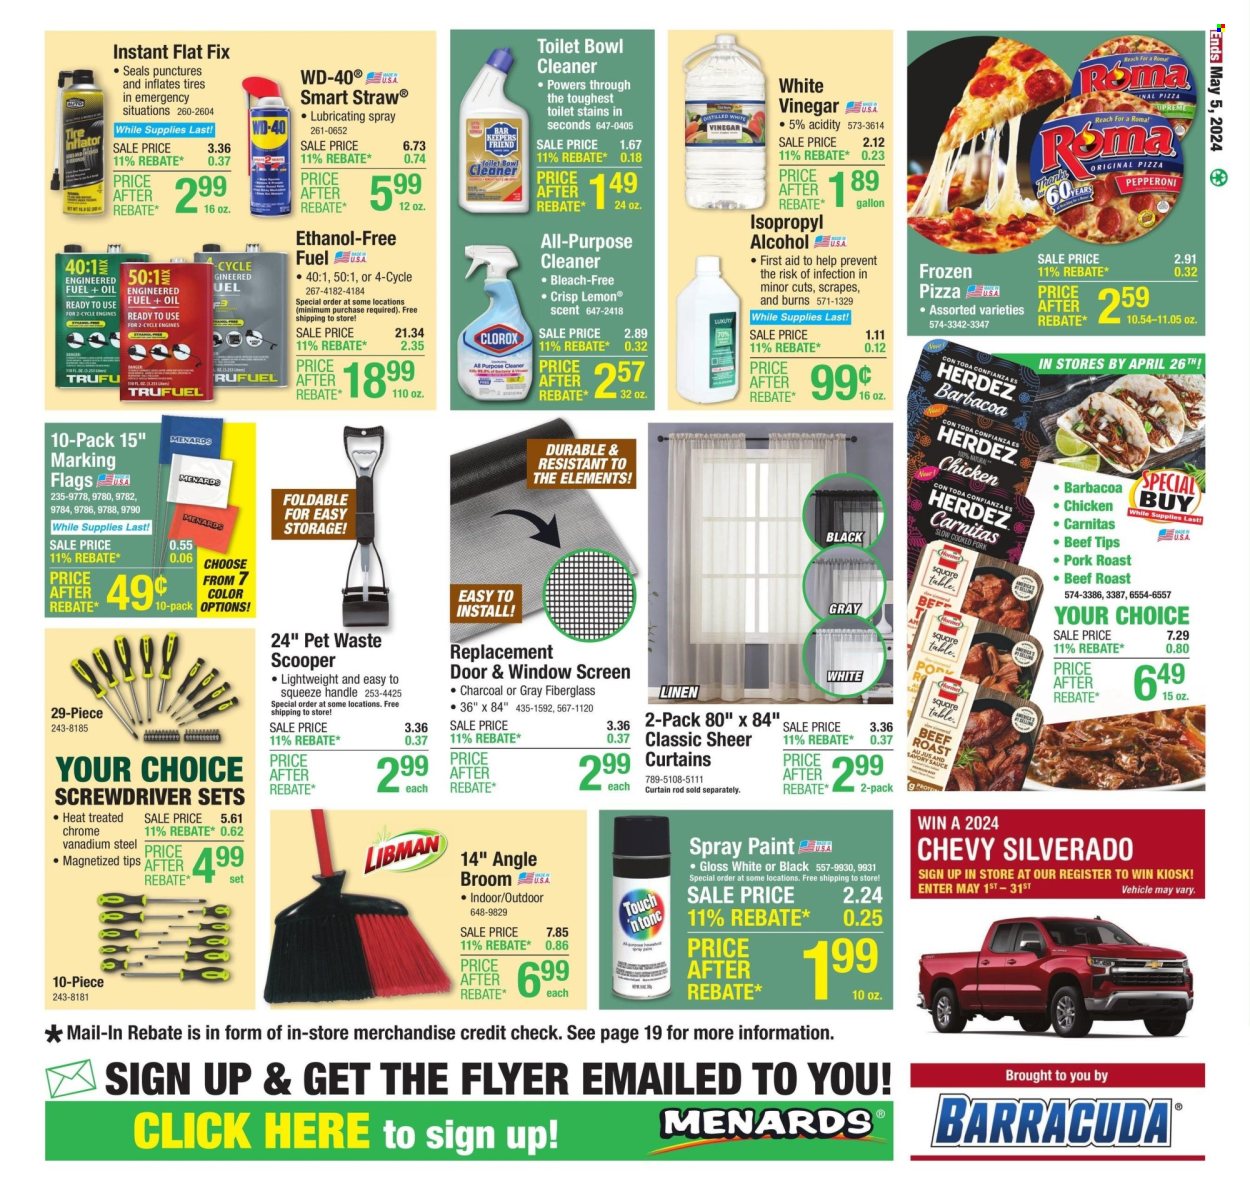 thumbnail - Menards Flyer - 04/25/2024 - 05/05/2024 - Sales products - barracuda, pizza, pork roast, Hormel, roast, cooked ham, roast beef, vinegar, oil, chicken, beef meat, pork meat, cleaner, bleach, all purpose cleaner, toilet cleaner, Clorox, broom, angle broom, straw, curtain, inflator, vehicle, spray paint, paint, charcoal, screwdriver, WD-40, tire inflator, tires, curtain rod. Page 31.